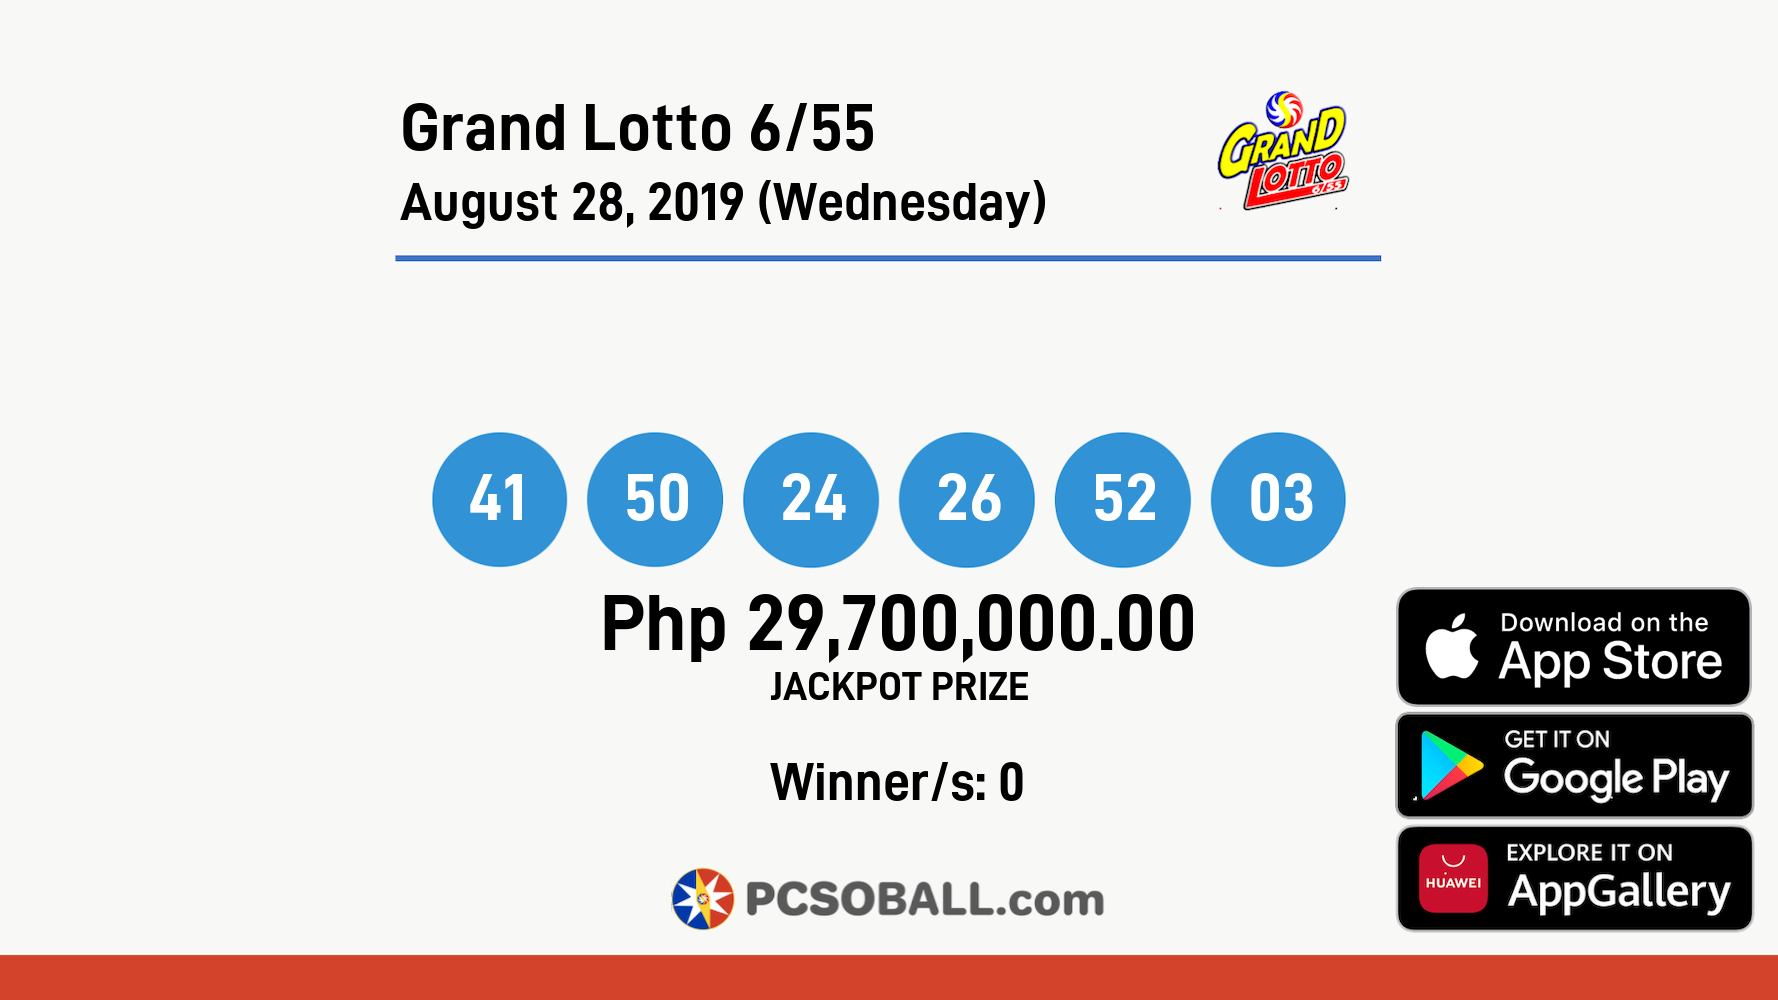 Grand Lotto 6/55 August 28, 2019 (Wednesday) Result